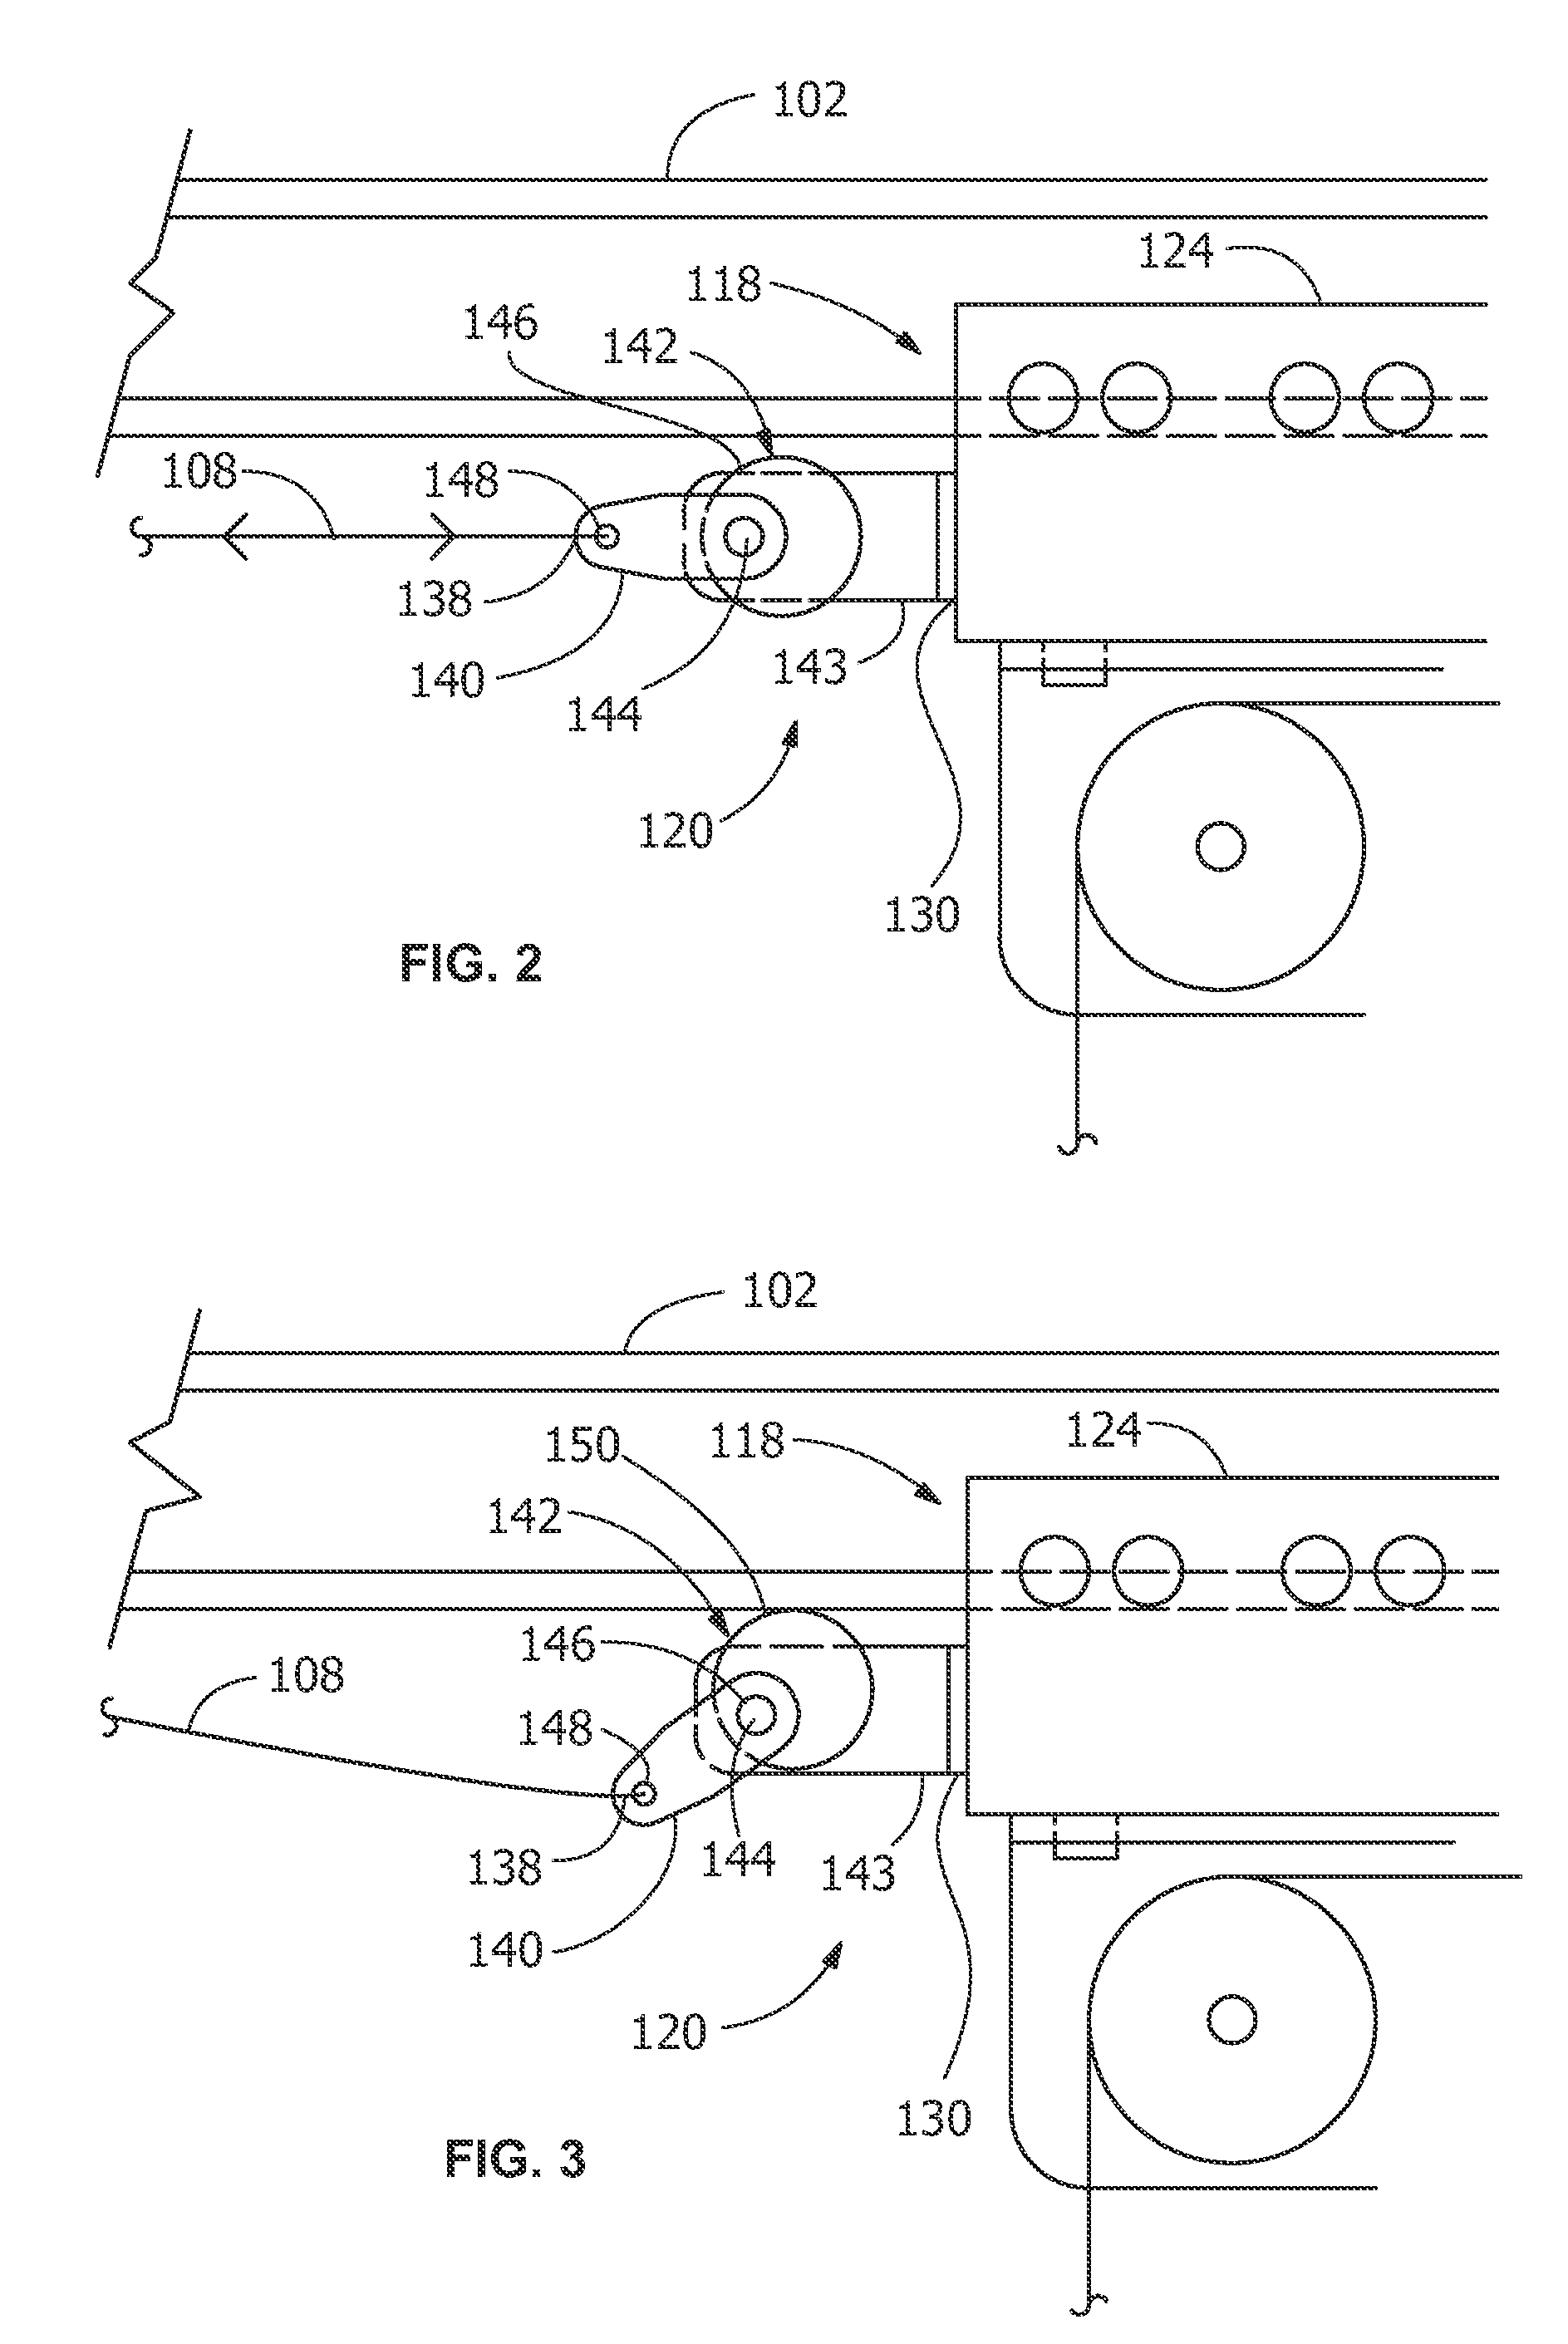 Engagement article, load positioning system, and process for positioning loads